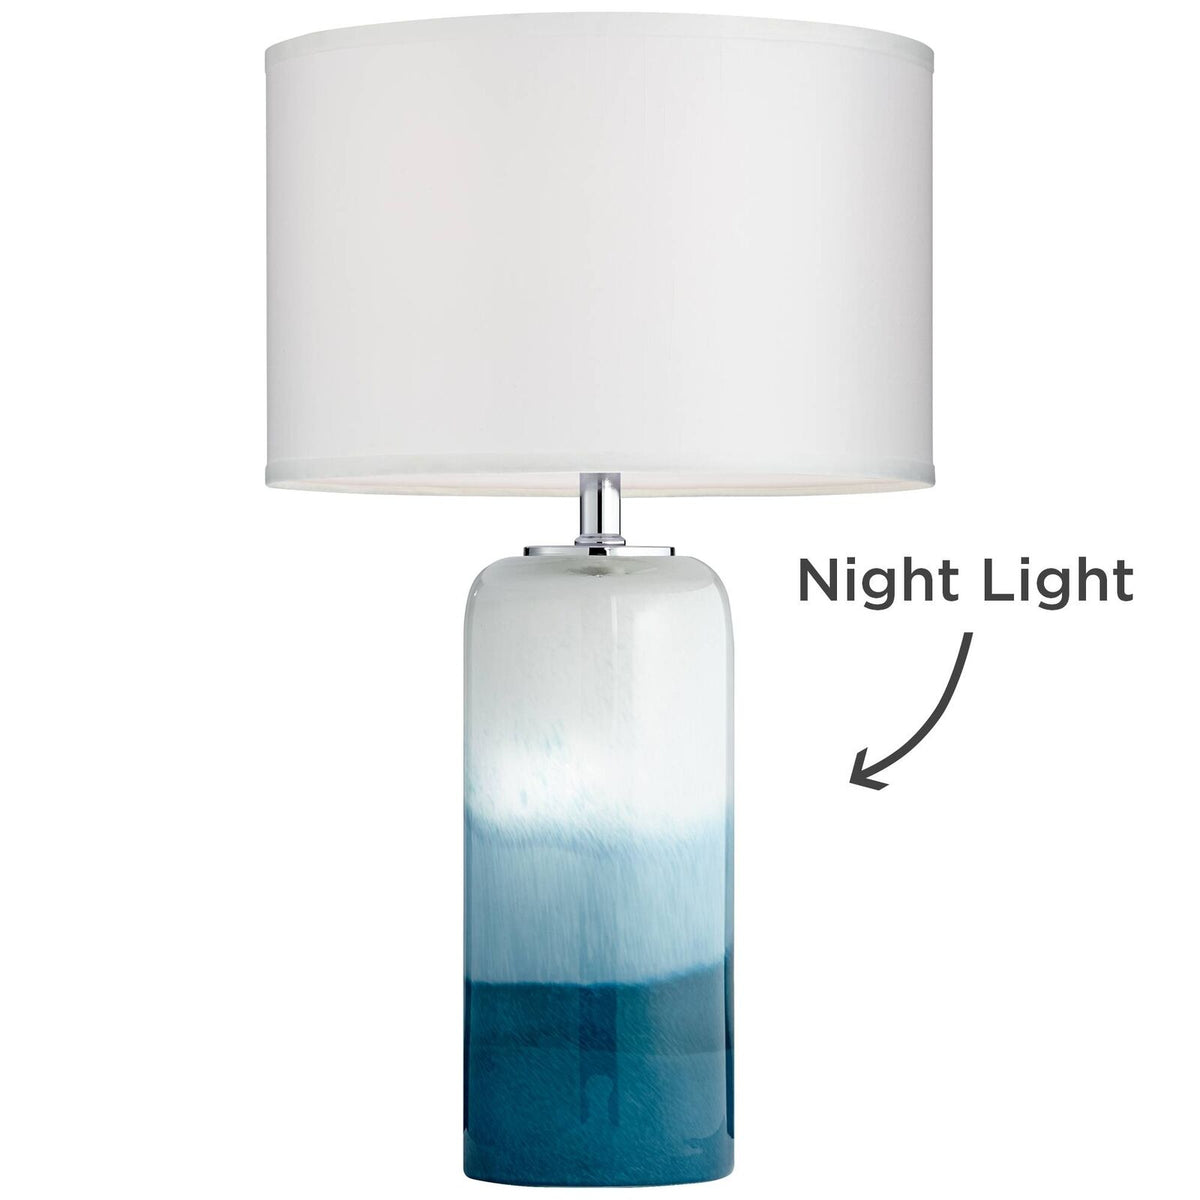 Blue Art Glass Table Lamp Modern Handcrafted Bedside Night Lamp W/ LED